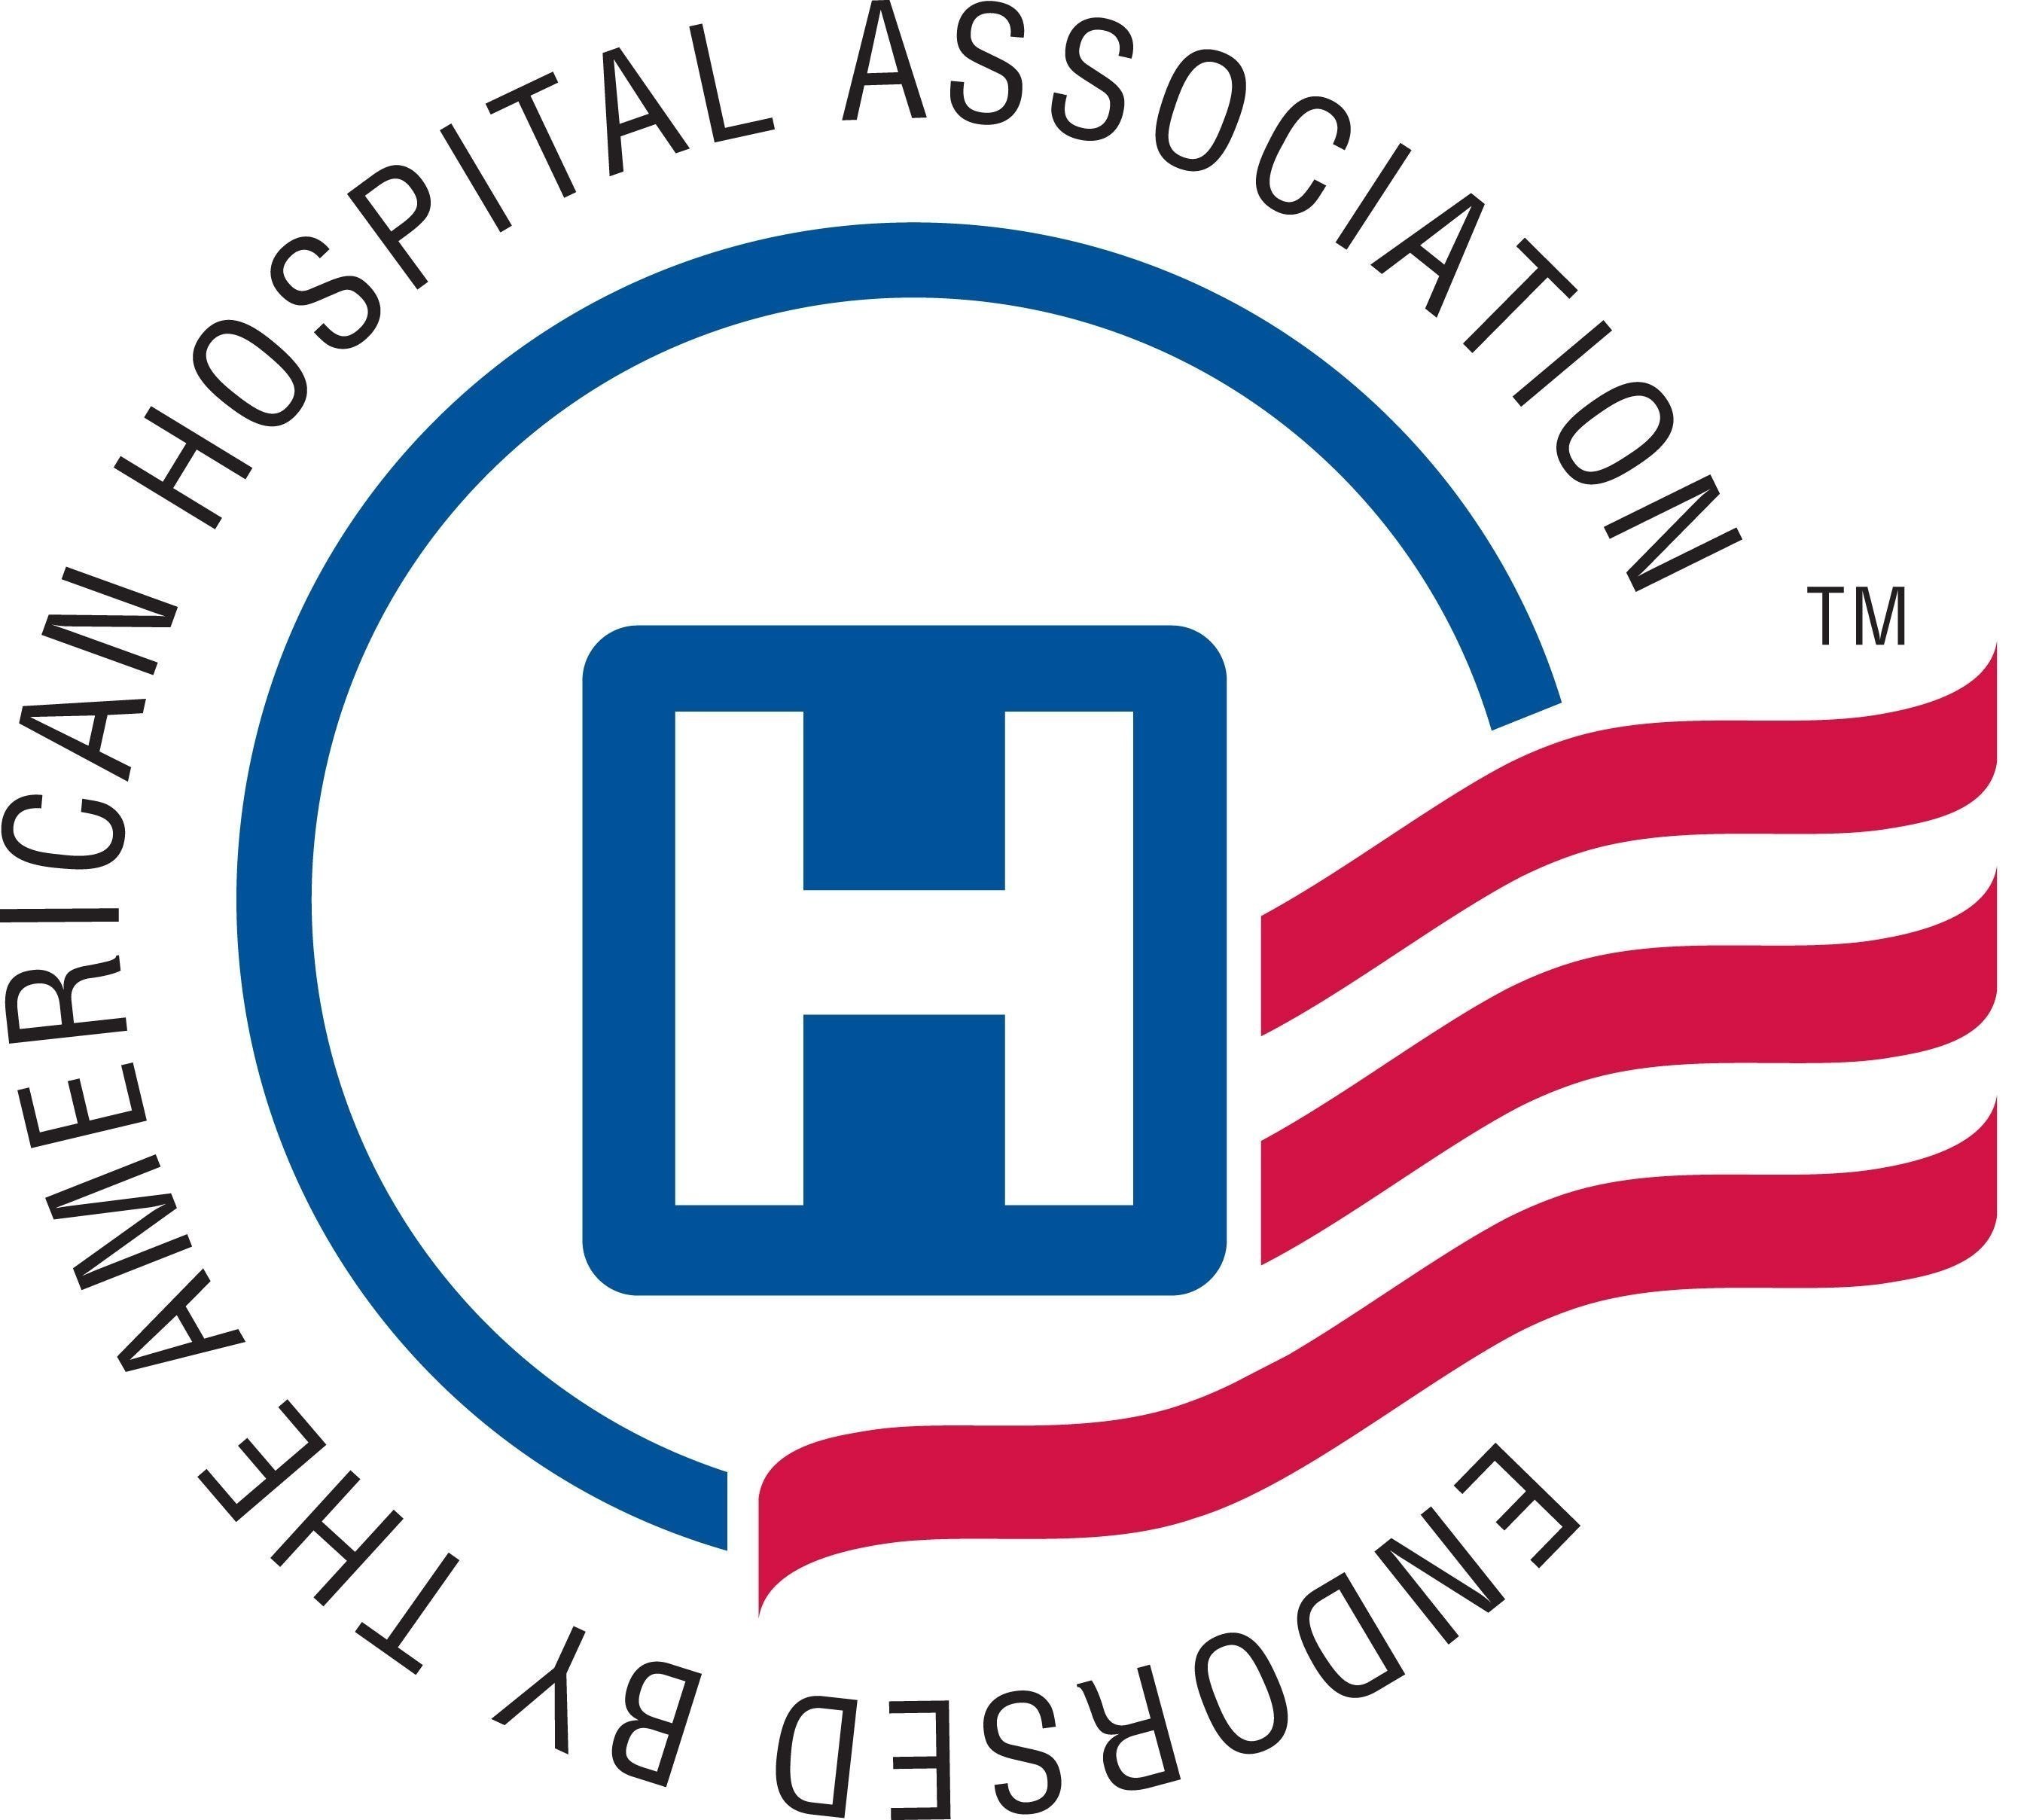 For more than 100 years, the American Hospital Association (AHA) has been a powerful symbol of quality. By consistently applying a formal due diligence process, AHA Solutions, Inc., an AHA member service, identifies products and services that foster operational excellence in our nation's hospitals.   AHA Solutions, Inc., a subsidiary of the American Hospital Association (AHA), is compensated for the use of the AHA marks and for its assistance in marketing endorsed products and services. By agreement, pricing of endorsed products and services may not be increased by the providers to reflect fees paid to the AHA.